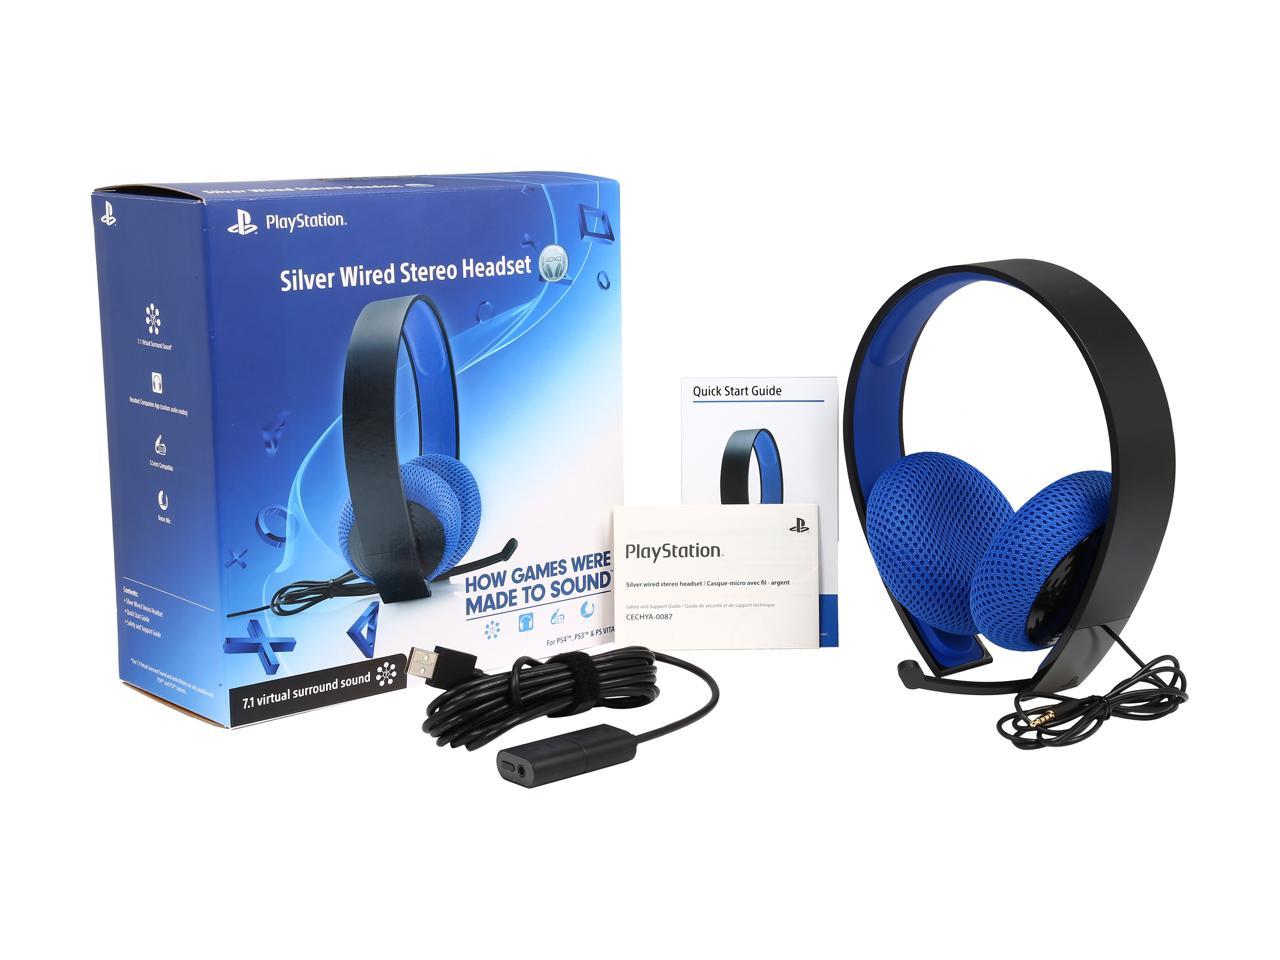 ps4 silver wired headset